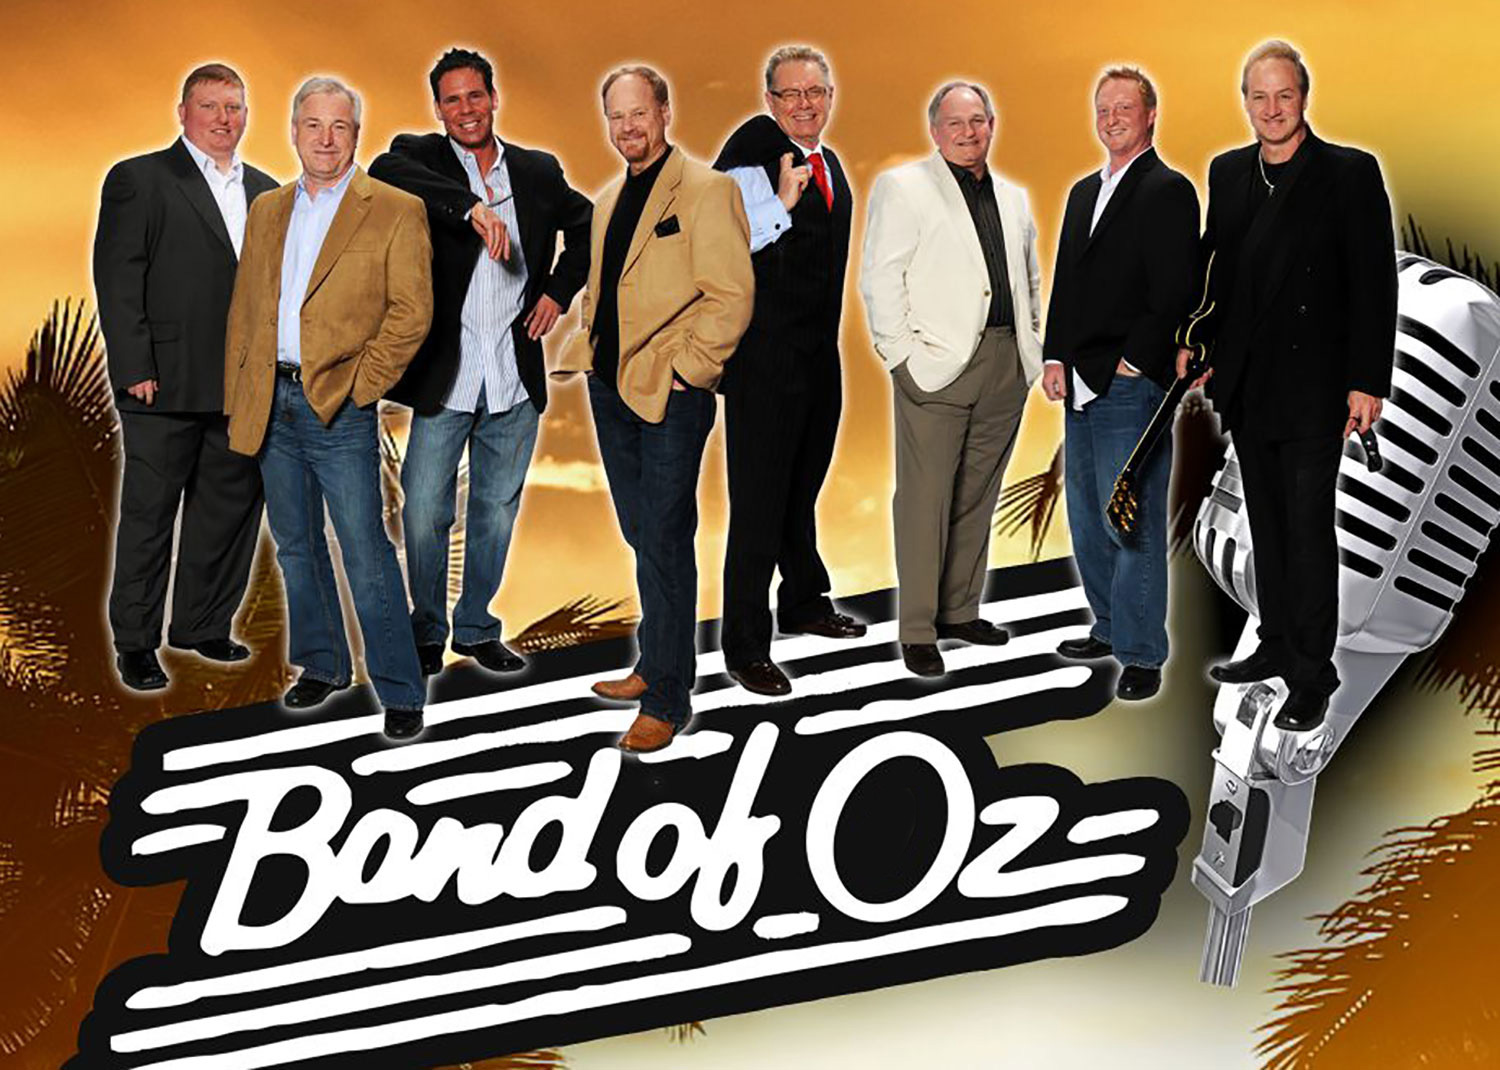 The Band of Oz Pine Forest of Oak Island